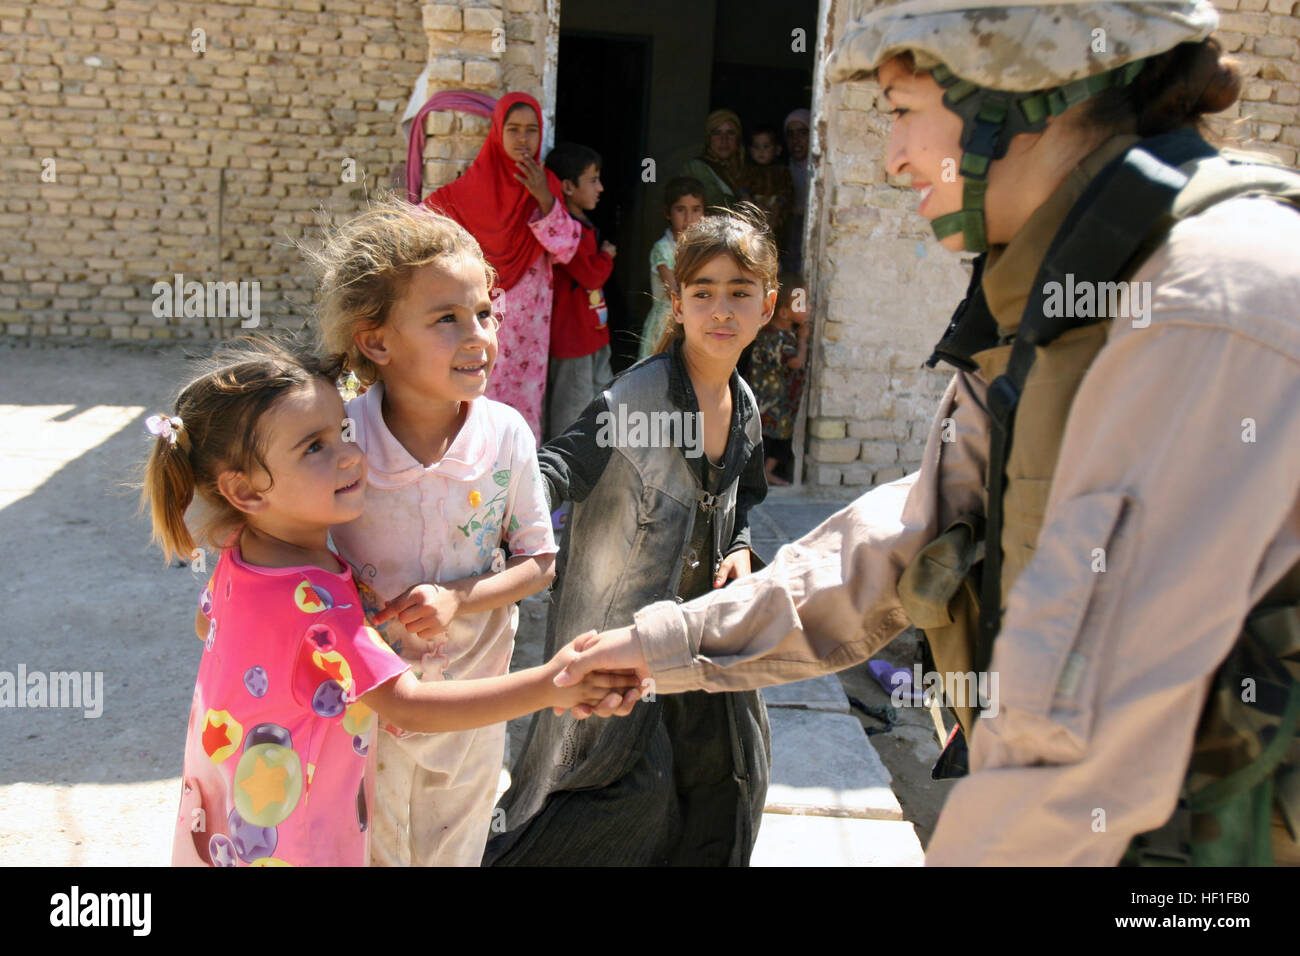 070928-M-0984M-006 KABANI, Iraq (Sept. 28, 2007) - Cpl. Julia Venegas, attached to 2D Marine Logistics Group, shakes hands with a little girl while on a security patrol. 2D Marine Logistics Group is deployed within the Al Anbar province to develop the Iraqi Security Force. U.S. Marine Corps photo by Lance Cpl. Robert S. Morgan (RELEASED) US Navy 070928-M-0984M-006 Cpl. Julia Venegas, attached to 2D Marine Logistics Group, shakes hands with a little girl while on a security patrol Stock Photo